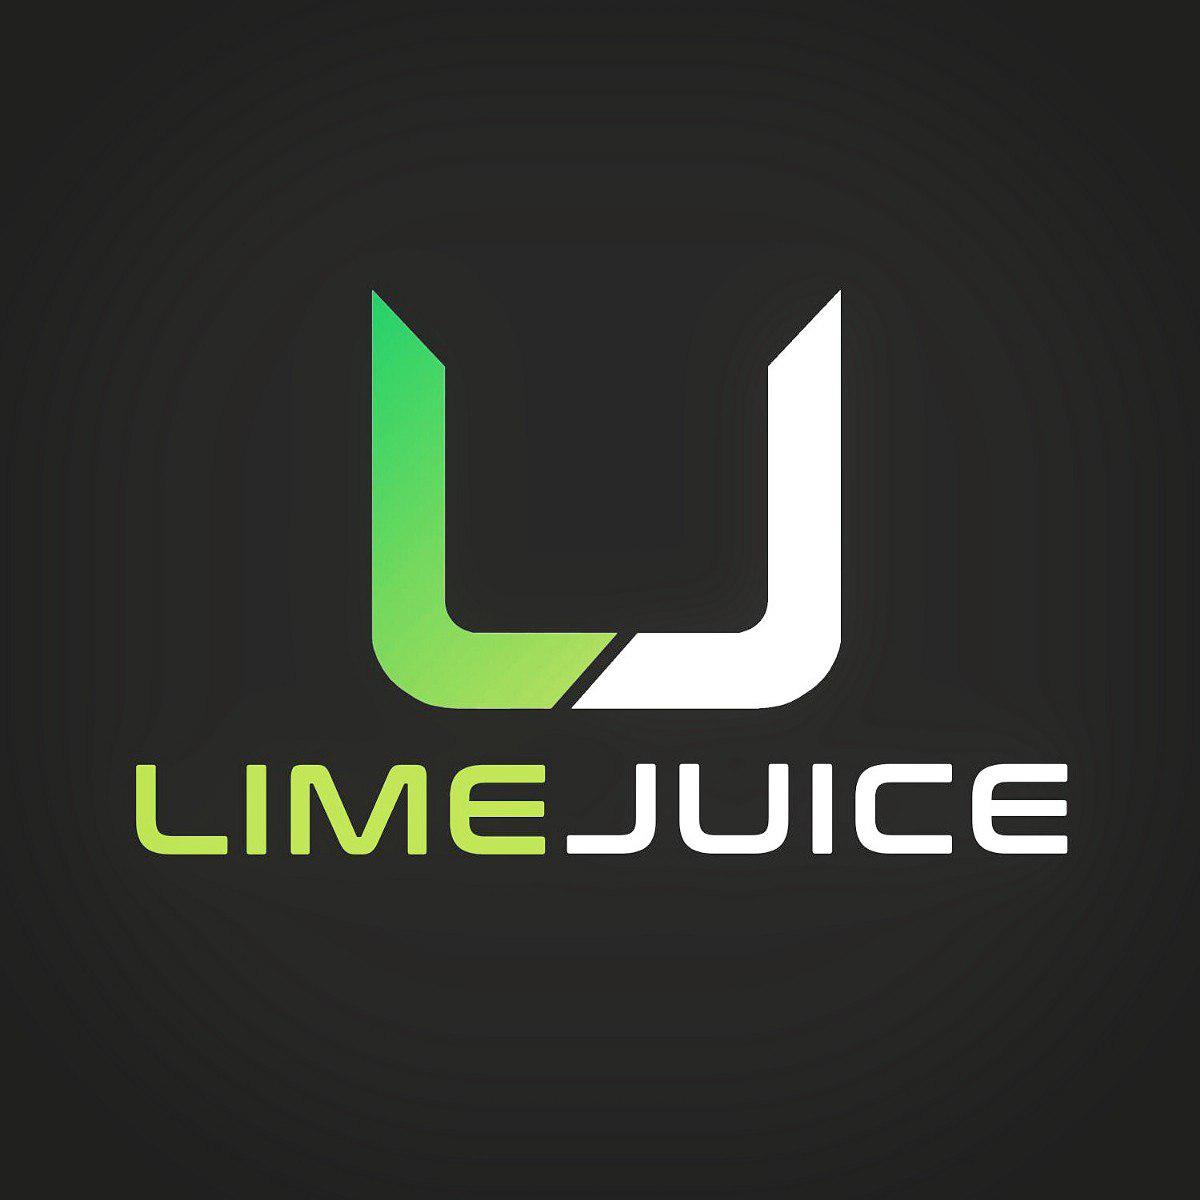 LimeJuice – The New Crypto Games Company